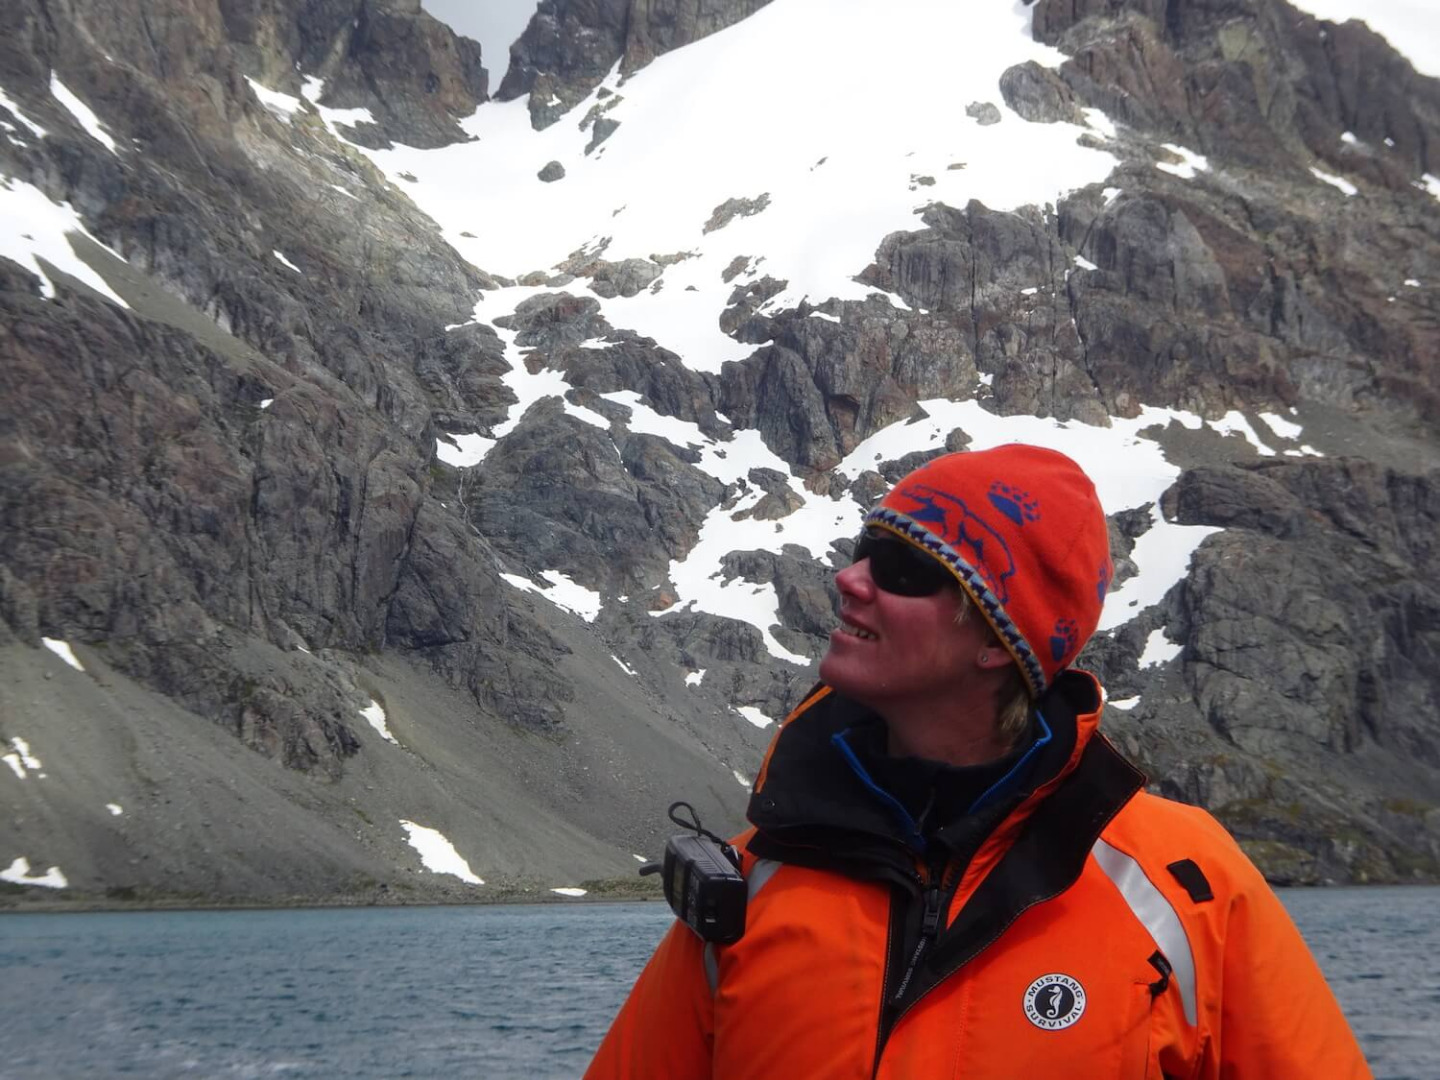 Photograph of Ashley Perrin, founder of Antarctic Ice Pilot, a yacht and superyacht services company that provides support for private and science expedition, adventure and sailing in the Antarctic and South Georgia.